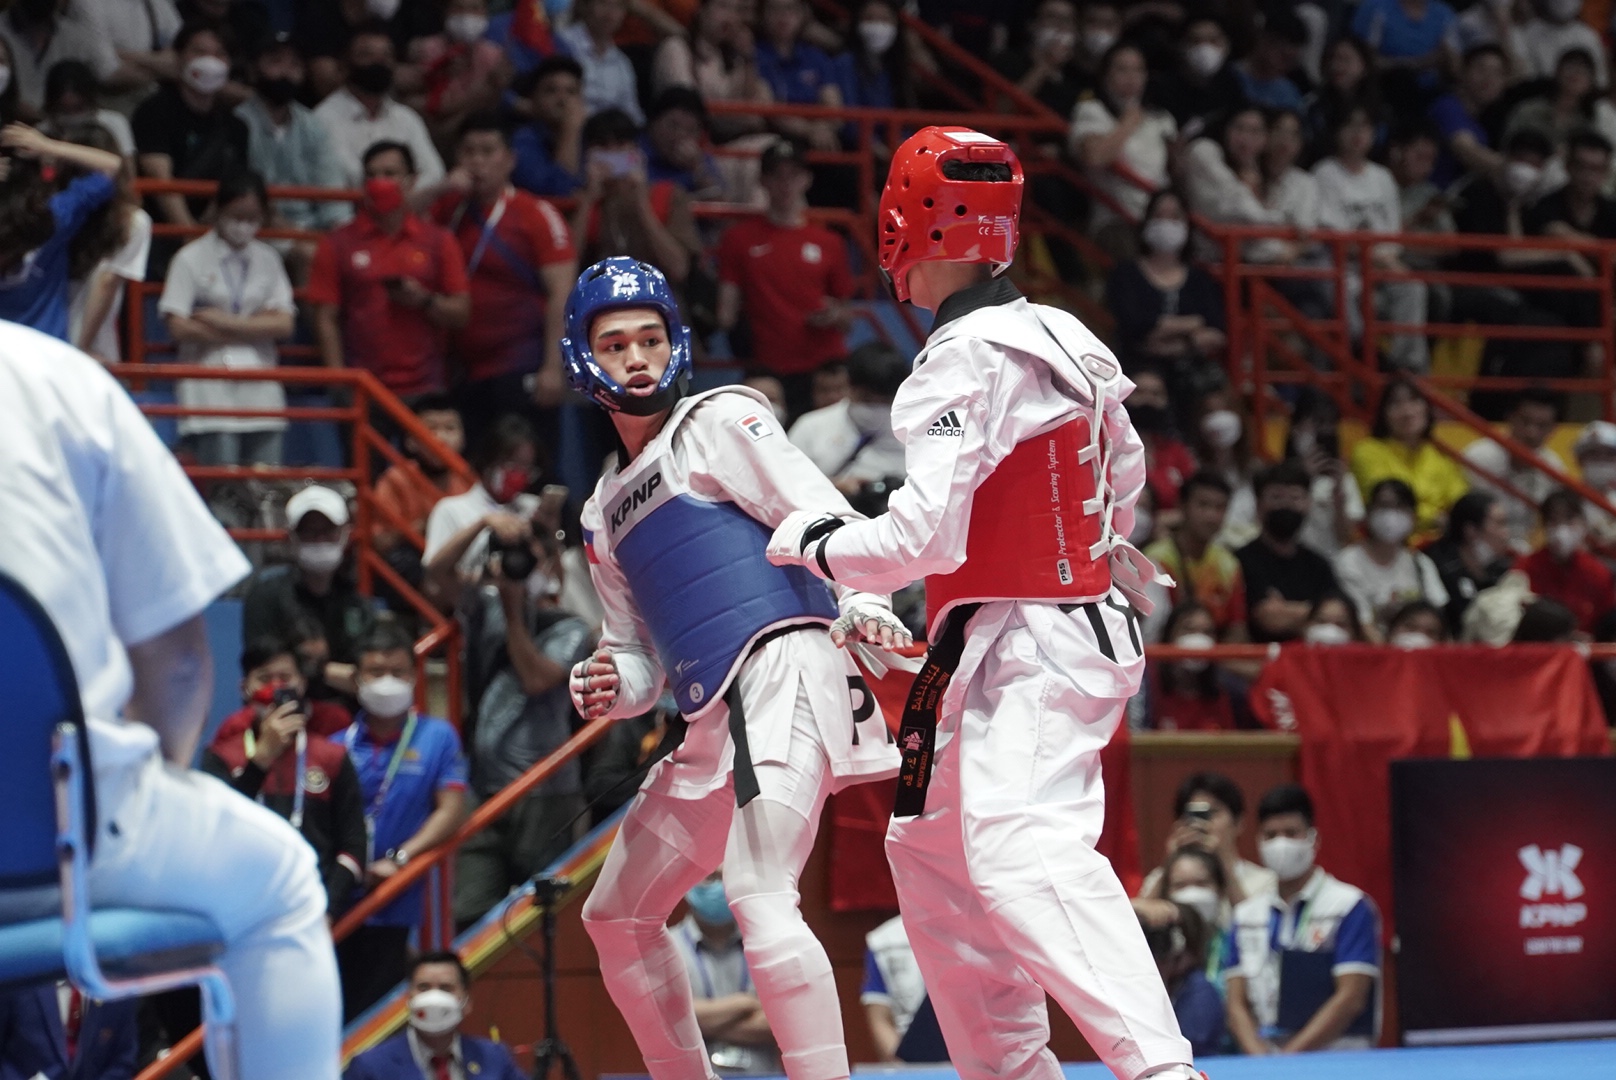 Kurt Barbosa in the 31st SEA Games male kyorugi under 54kg competition. POC PHOTO